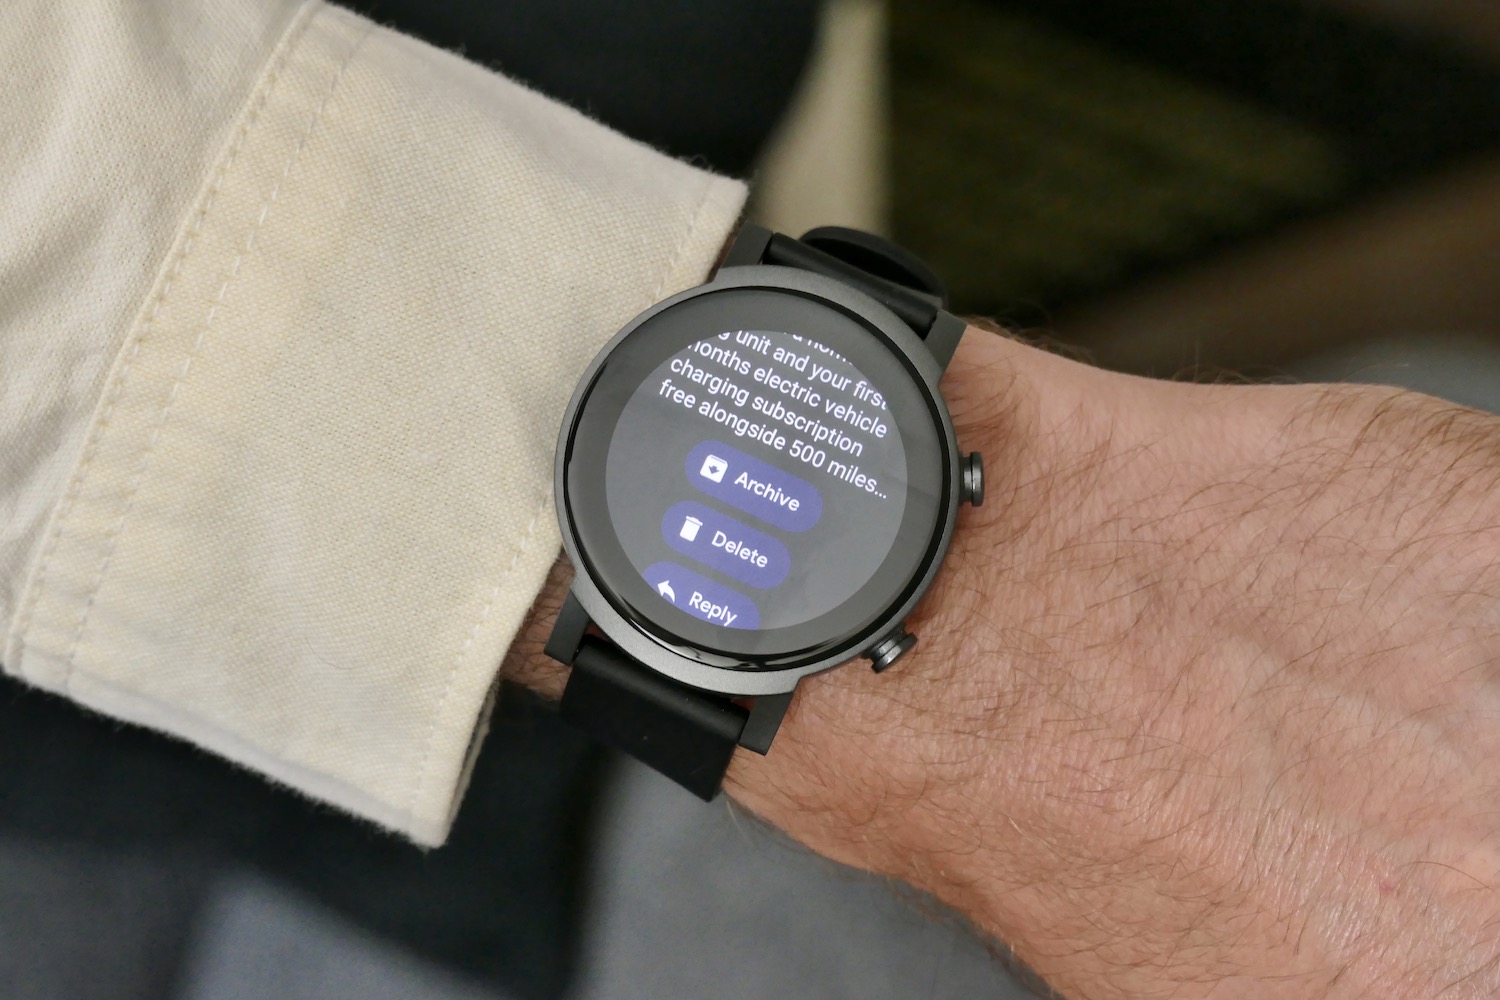 Notification responses on the TicWatch E3